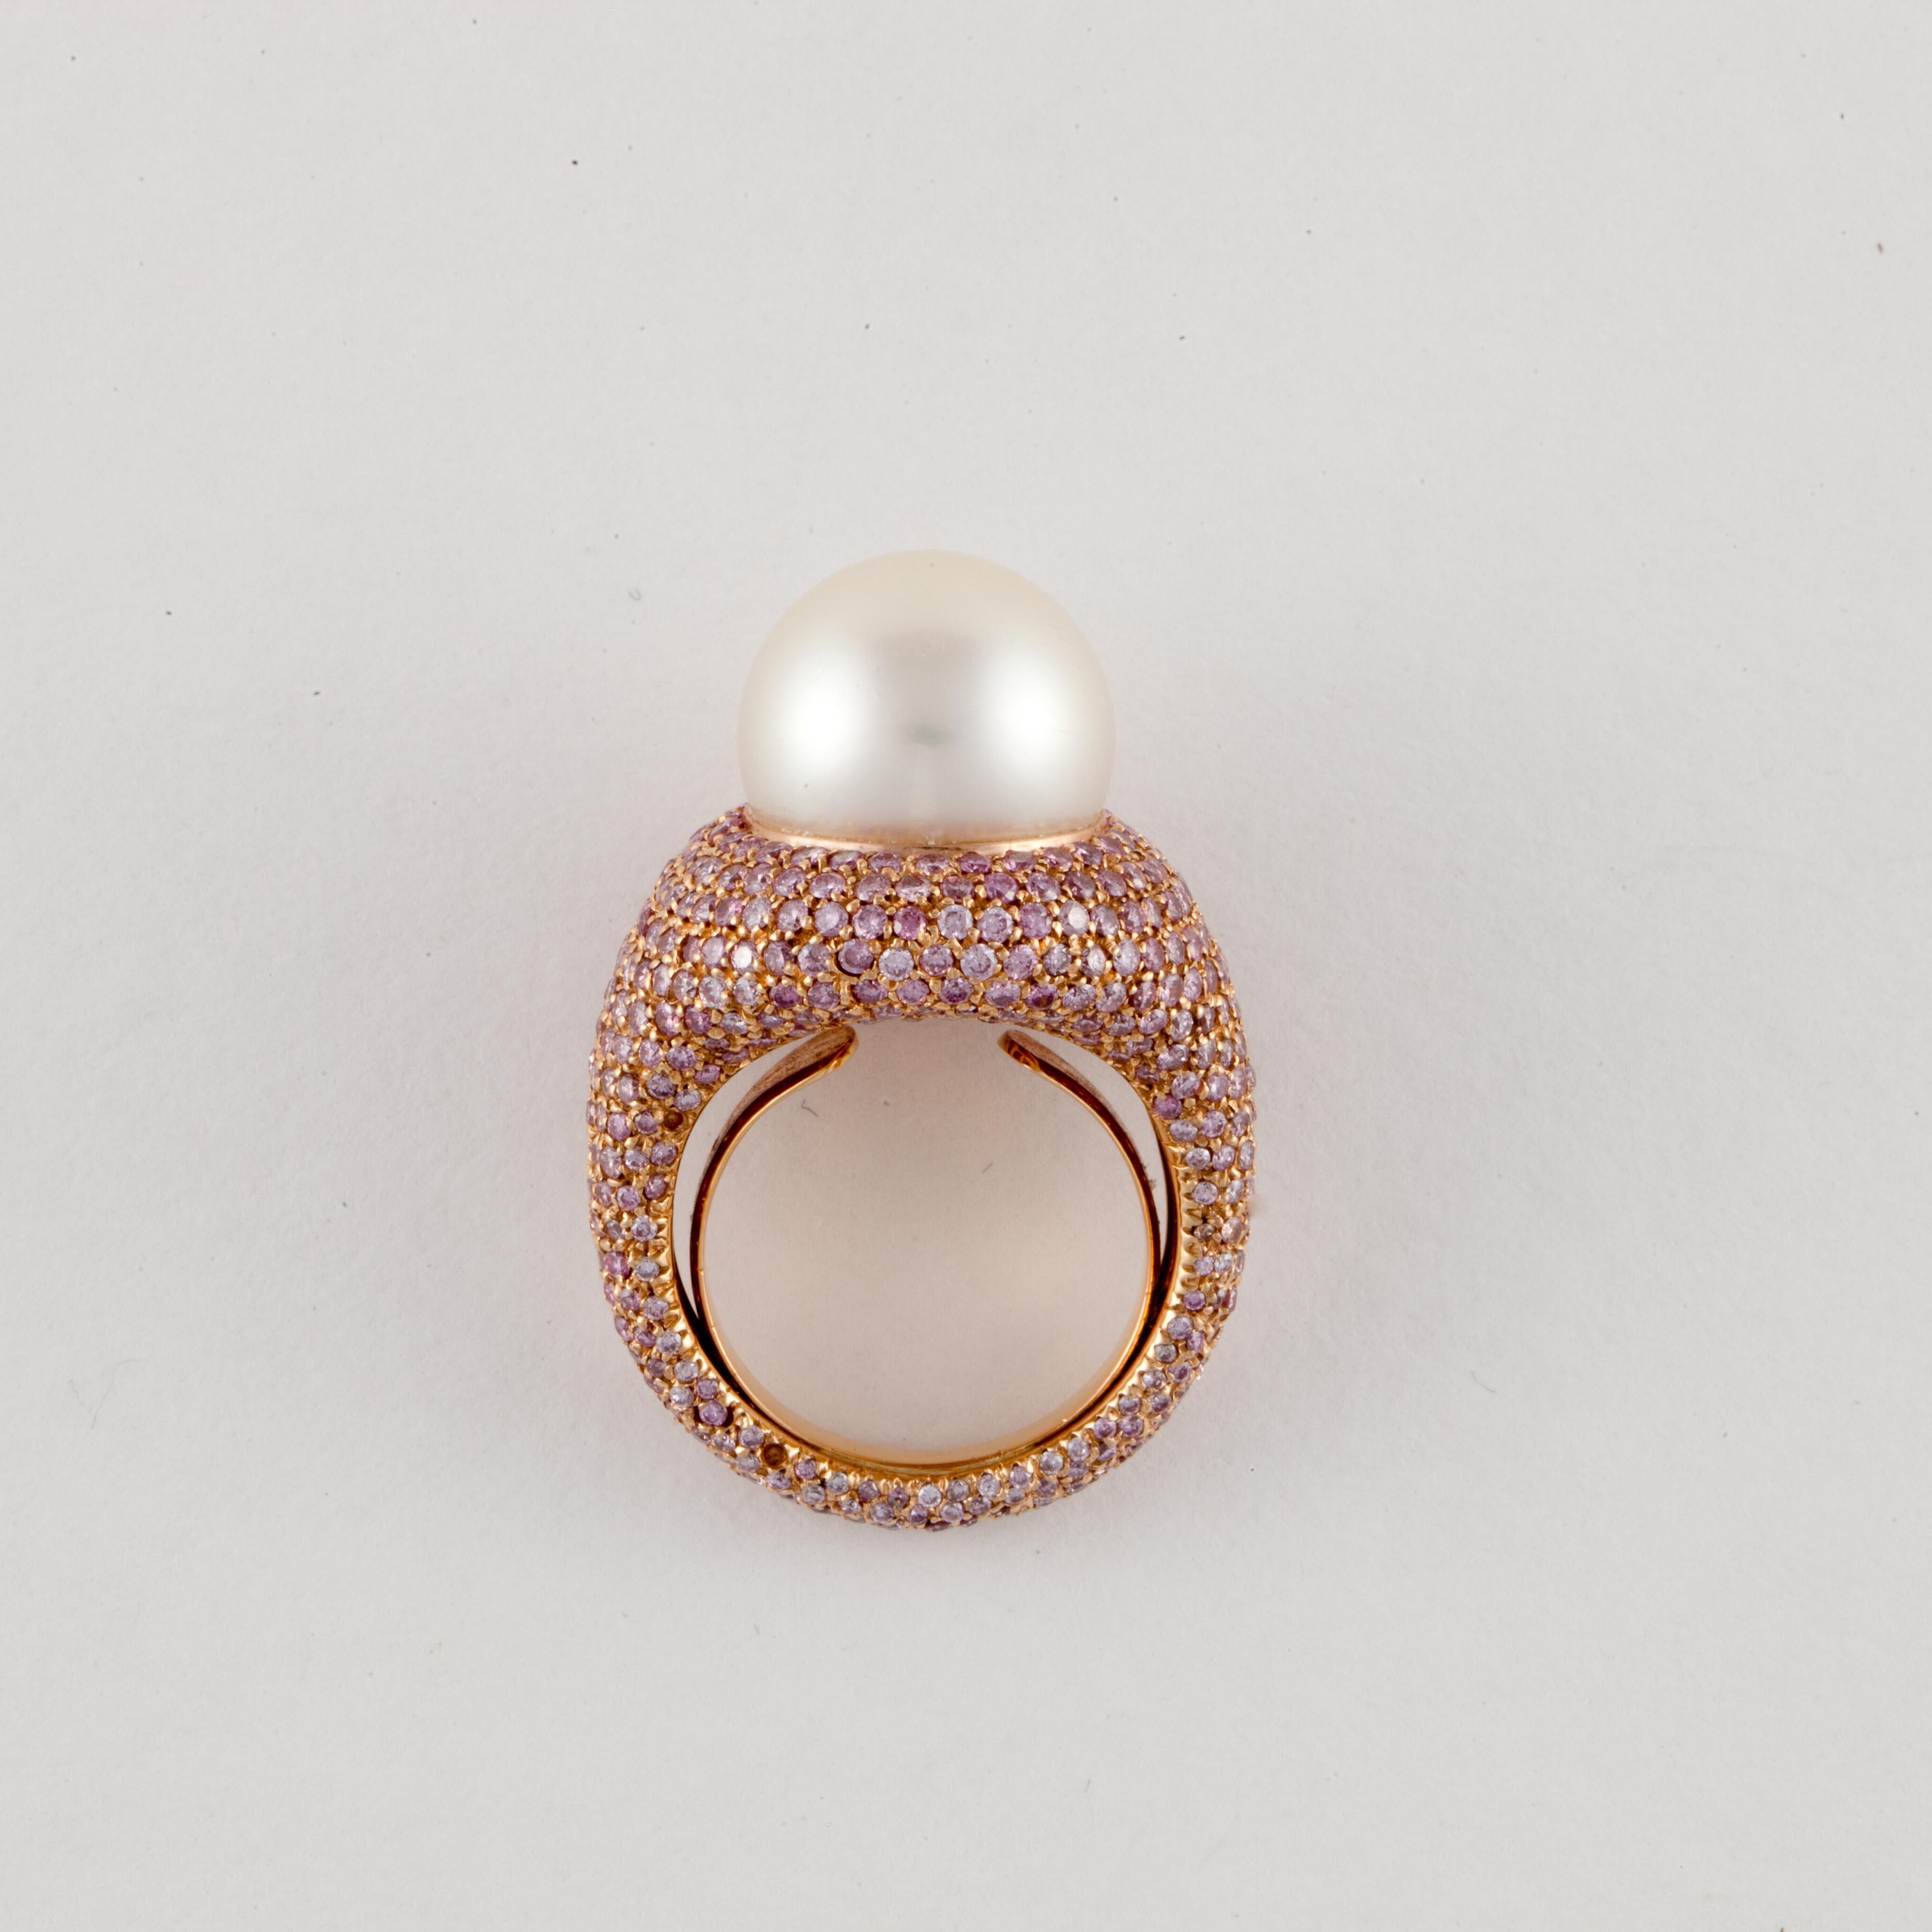 18K rose gold ring featuring a South Sea pearl with pavé-set pink round diamonds.  The pearl measures 14mm.  The ring is encrusted with round pink diamonds that go all around the ring totaling 4.75 carats.  Ring is a size 6 with butterfly insert. 